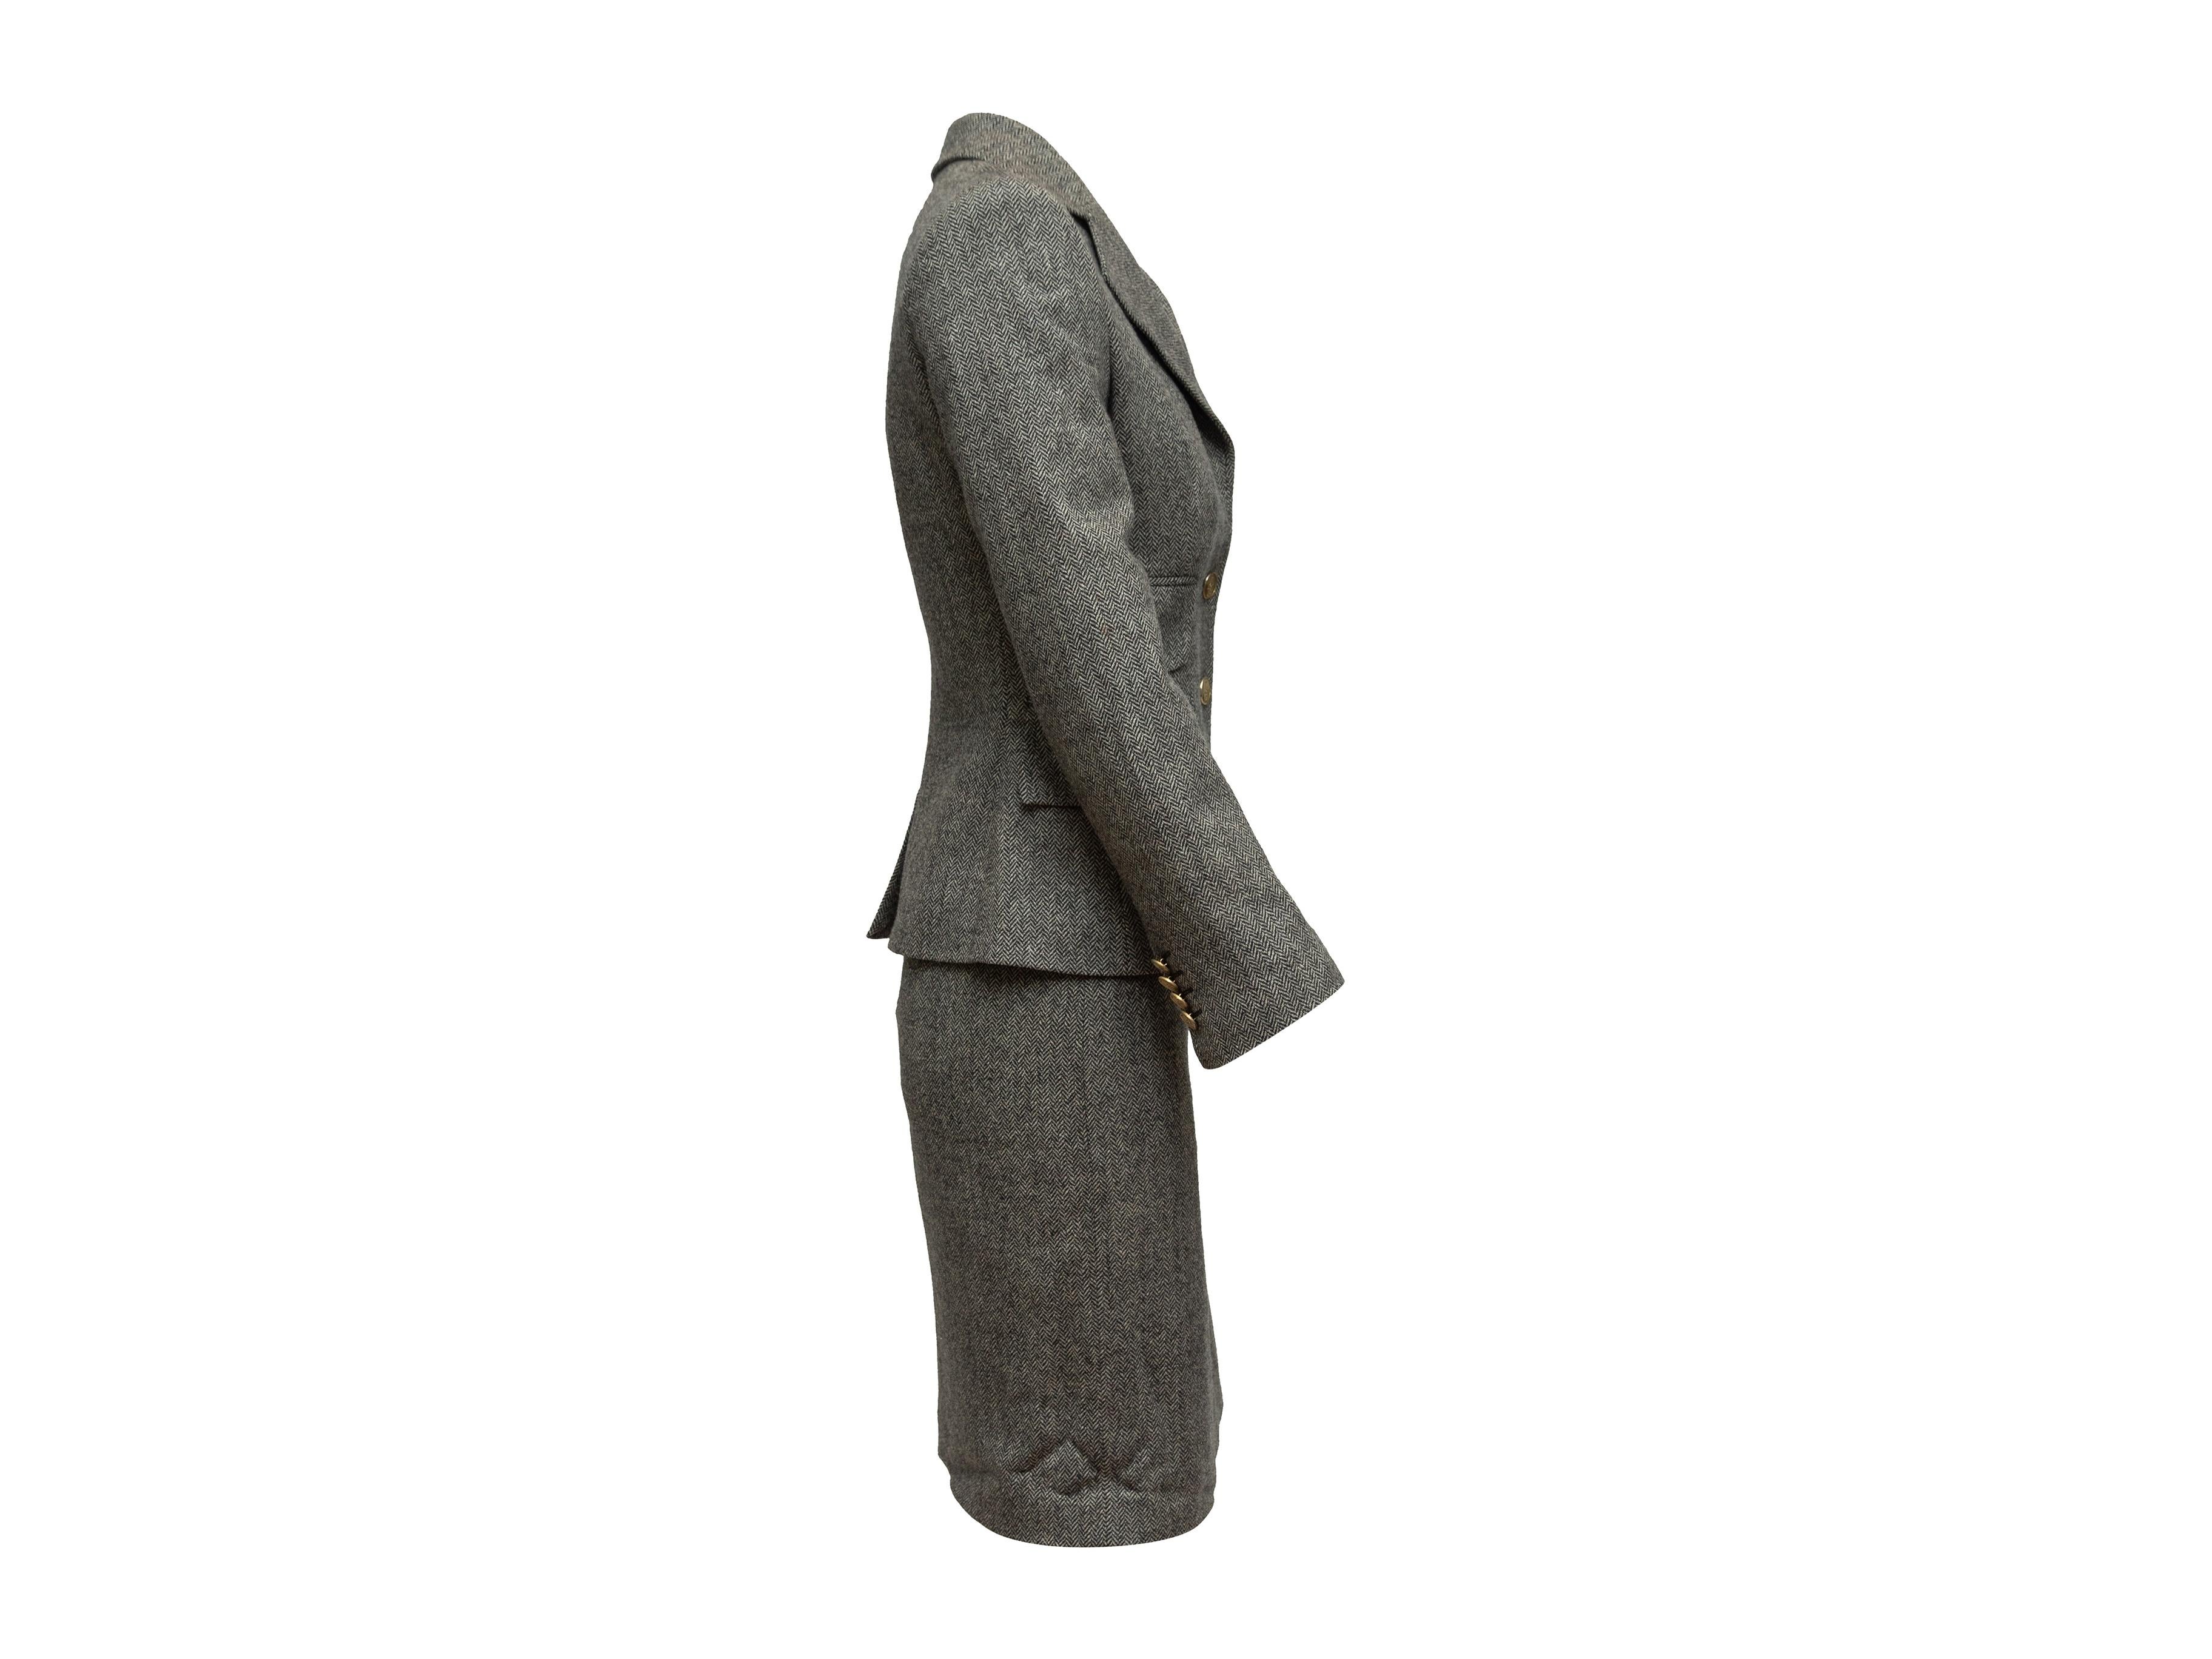 Product details: Grey cashmere and virgin wool skirt suit by Dolce & Gabbana. Herringbone pattern throughout. Notched lapel. Three flap pockets at blazer. Gold-tone button closures at blazer. Designer size 38. Blazer- 29